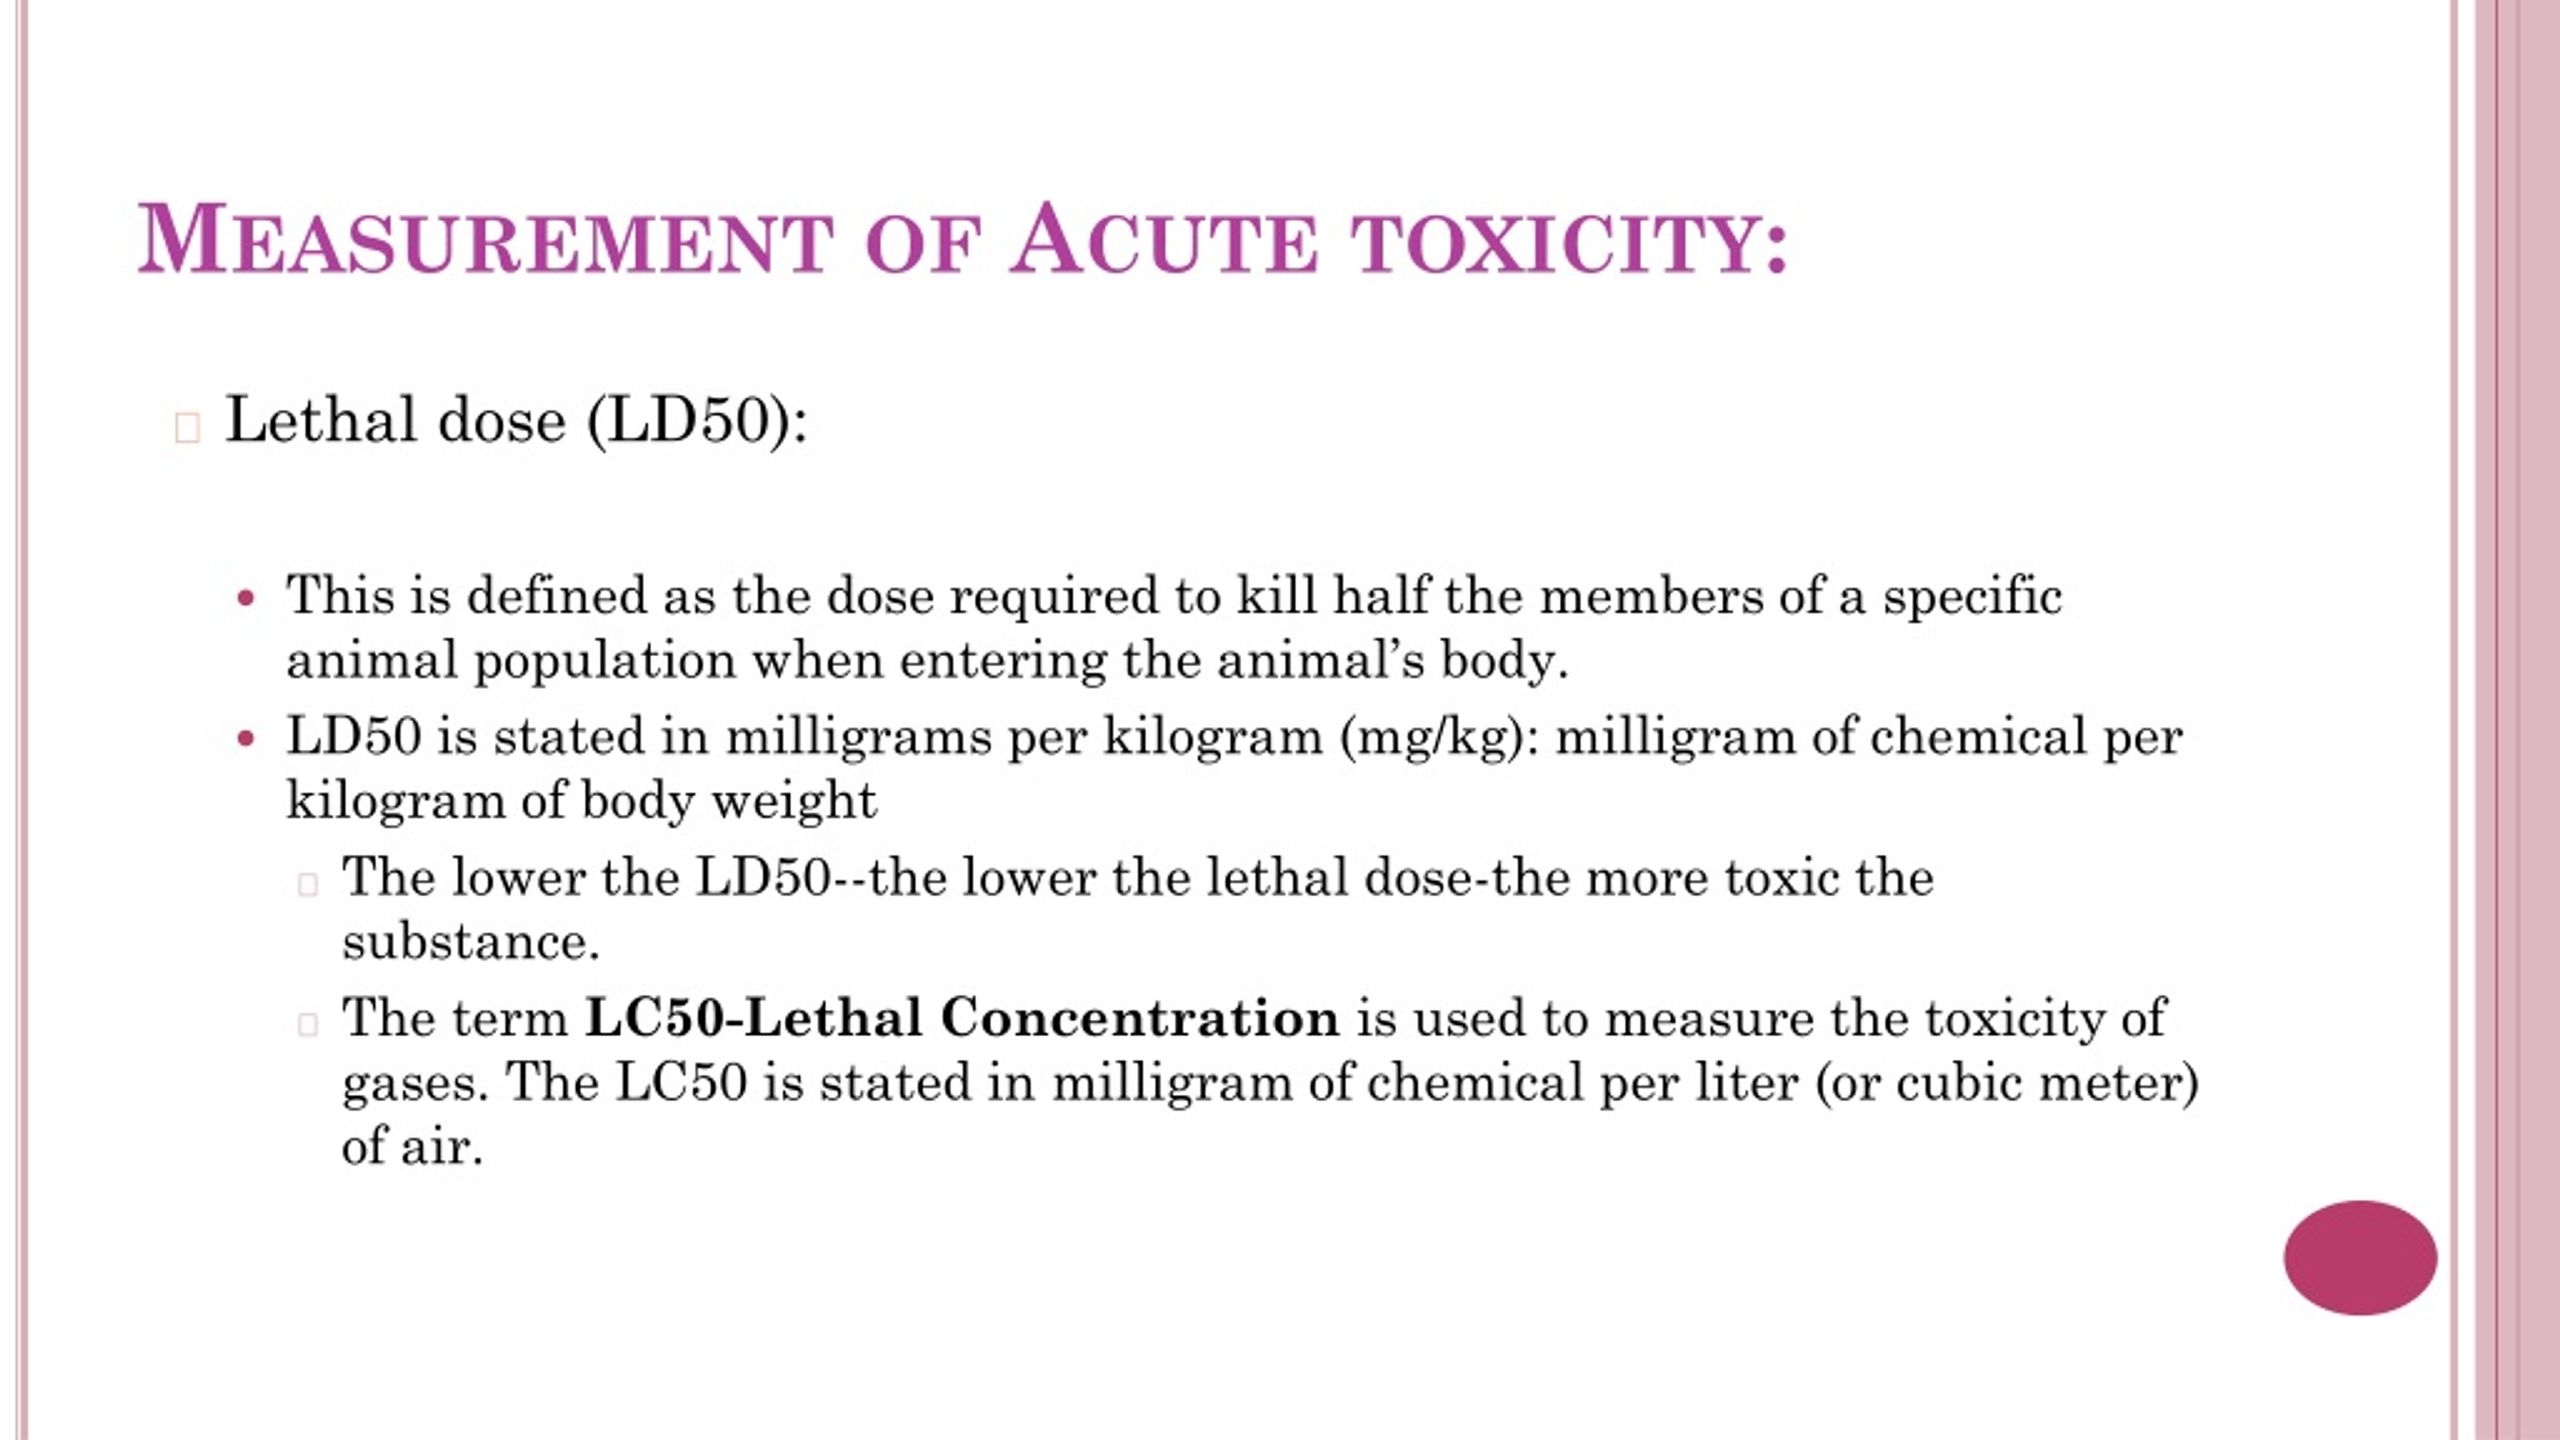 Measures of Toxicity